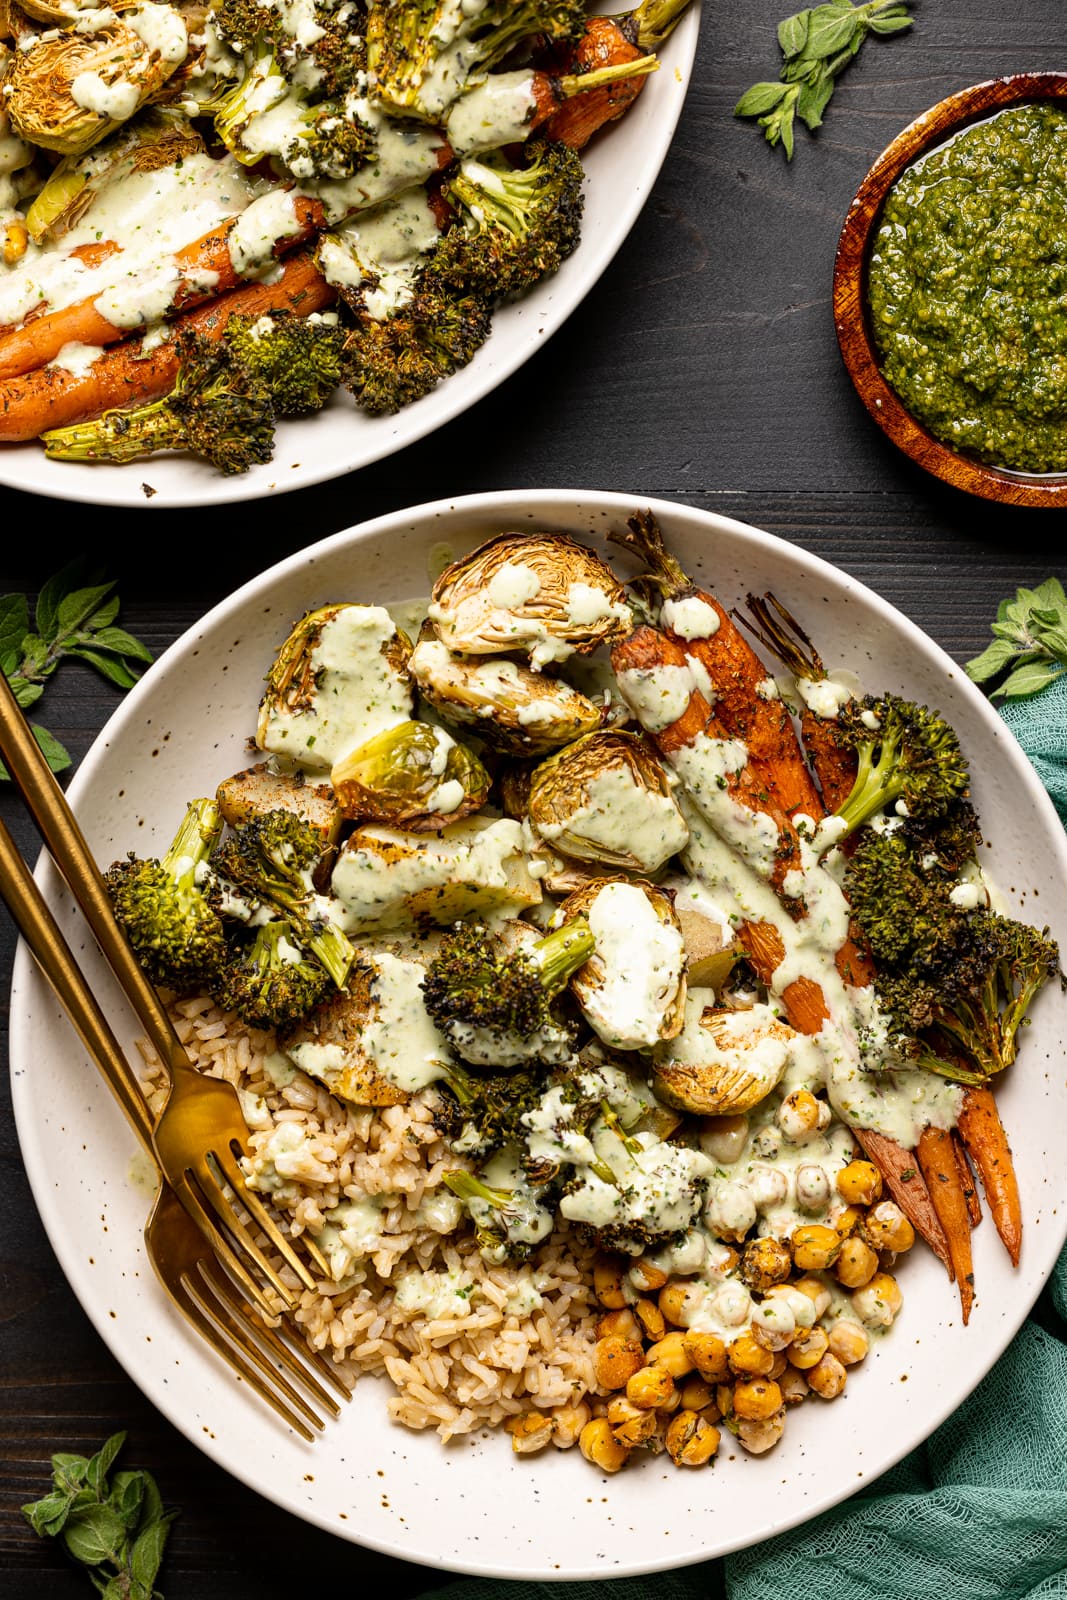 Veggie bowl in two low bowls on a black table with pesto sauce and two forks and herbs.